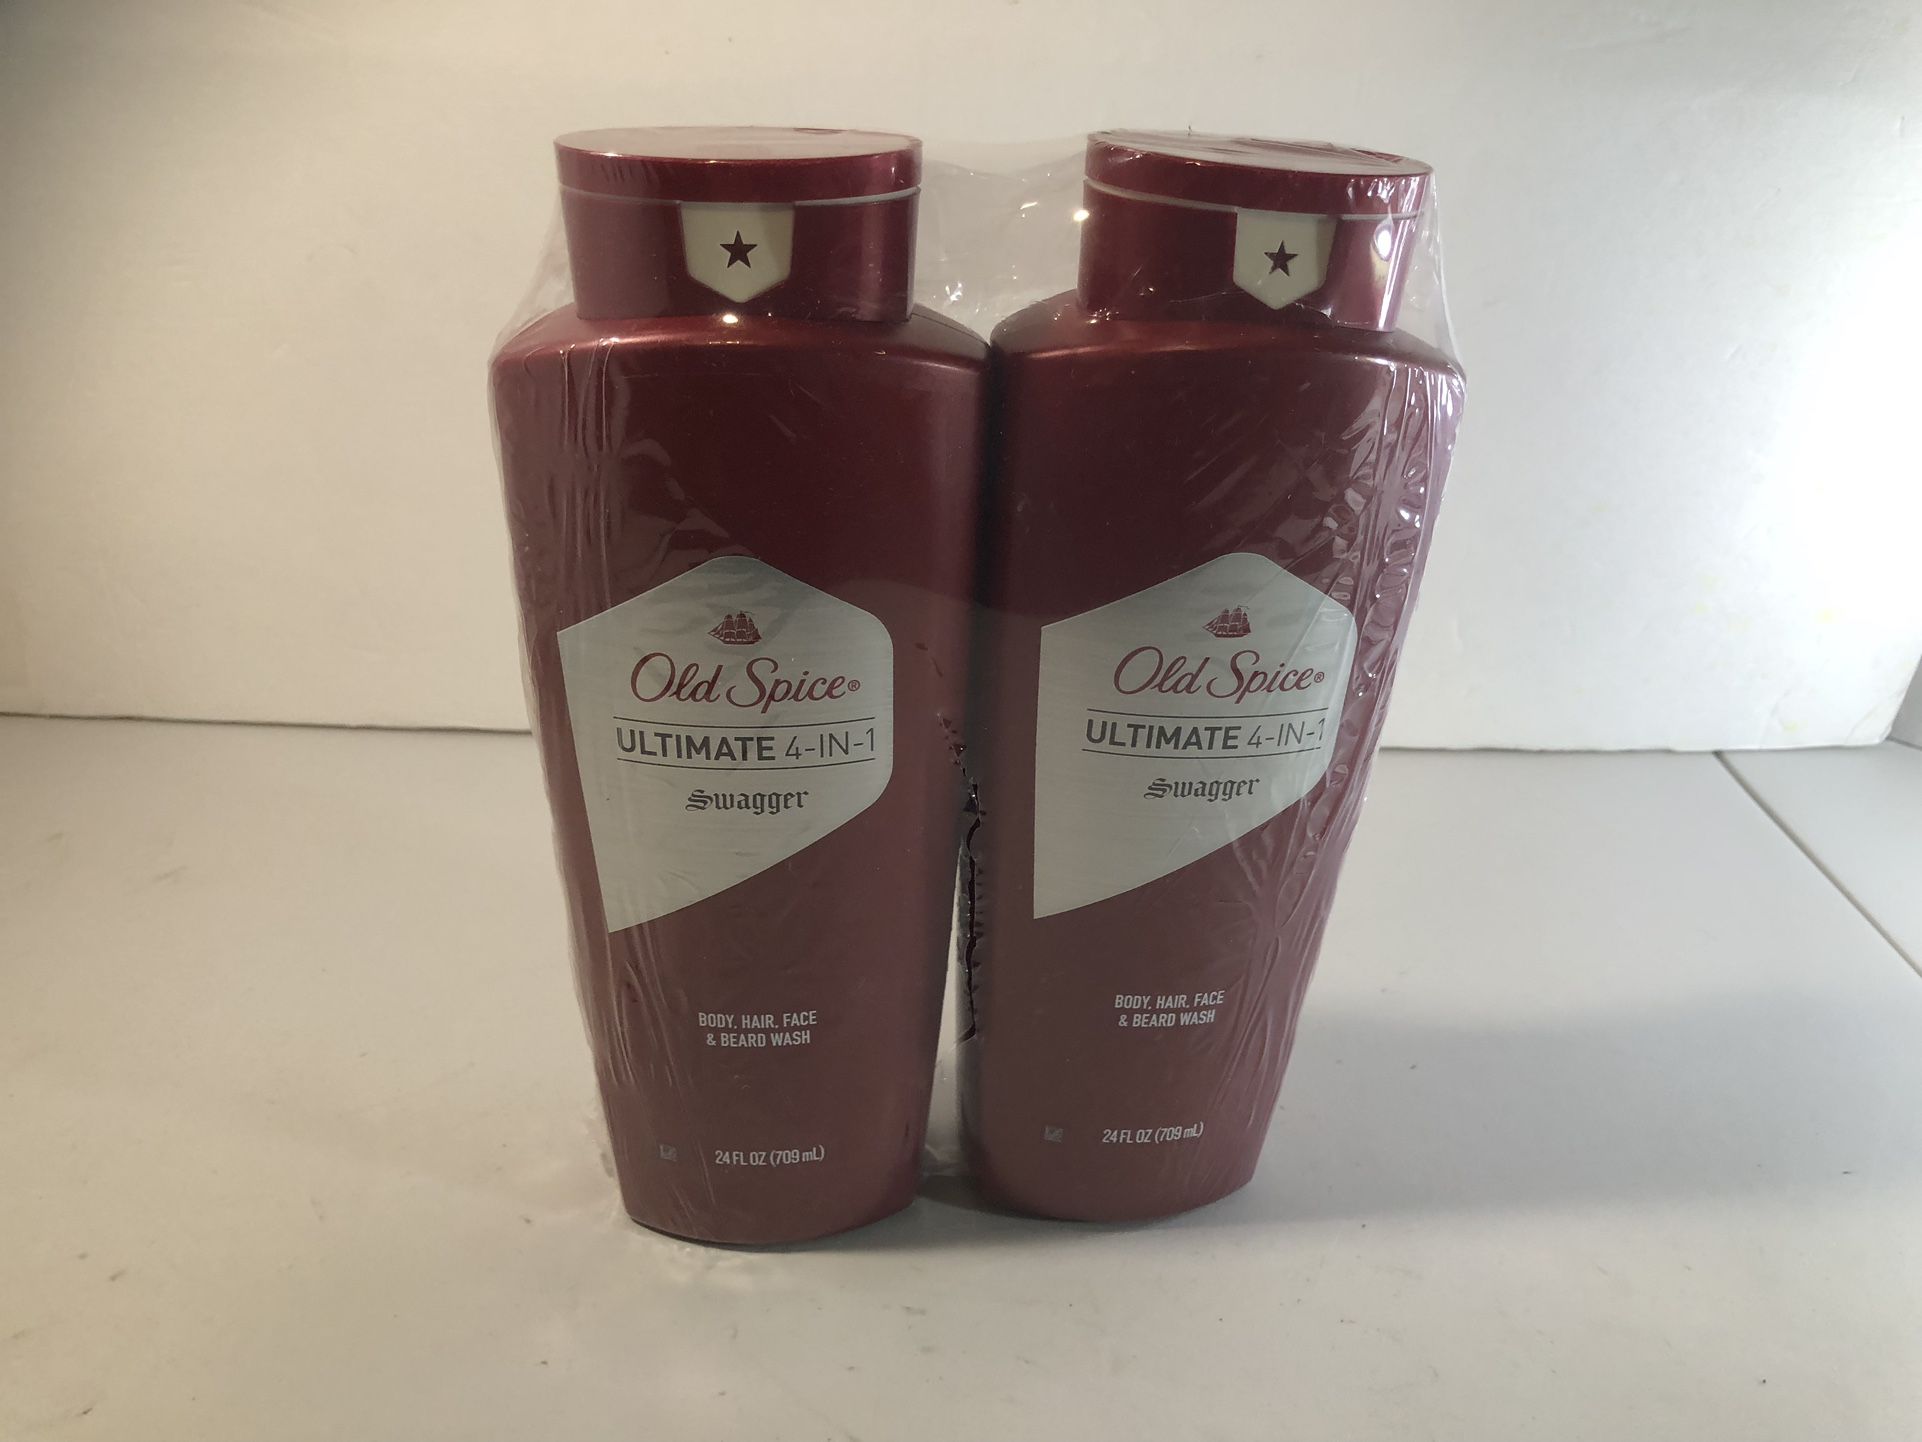 Old Spice Ultmate 4in 1 Body,Hair,Face & Beard Wash 2 pack  24oz